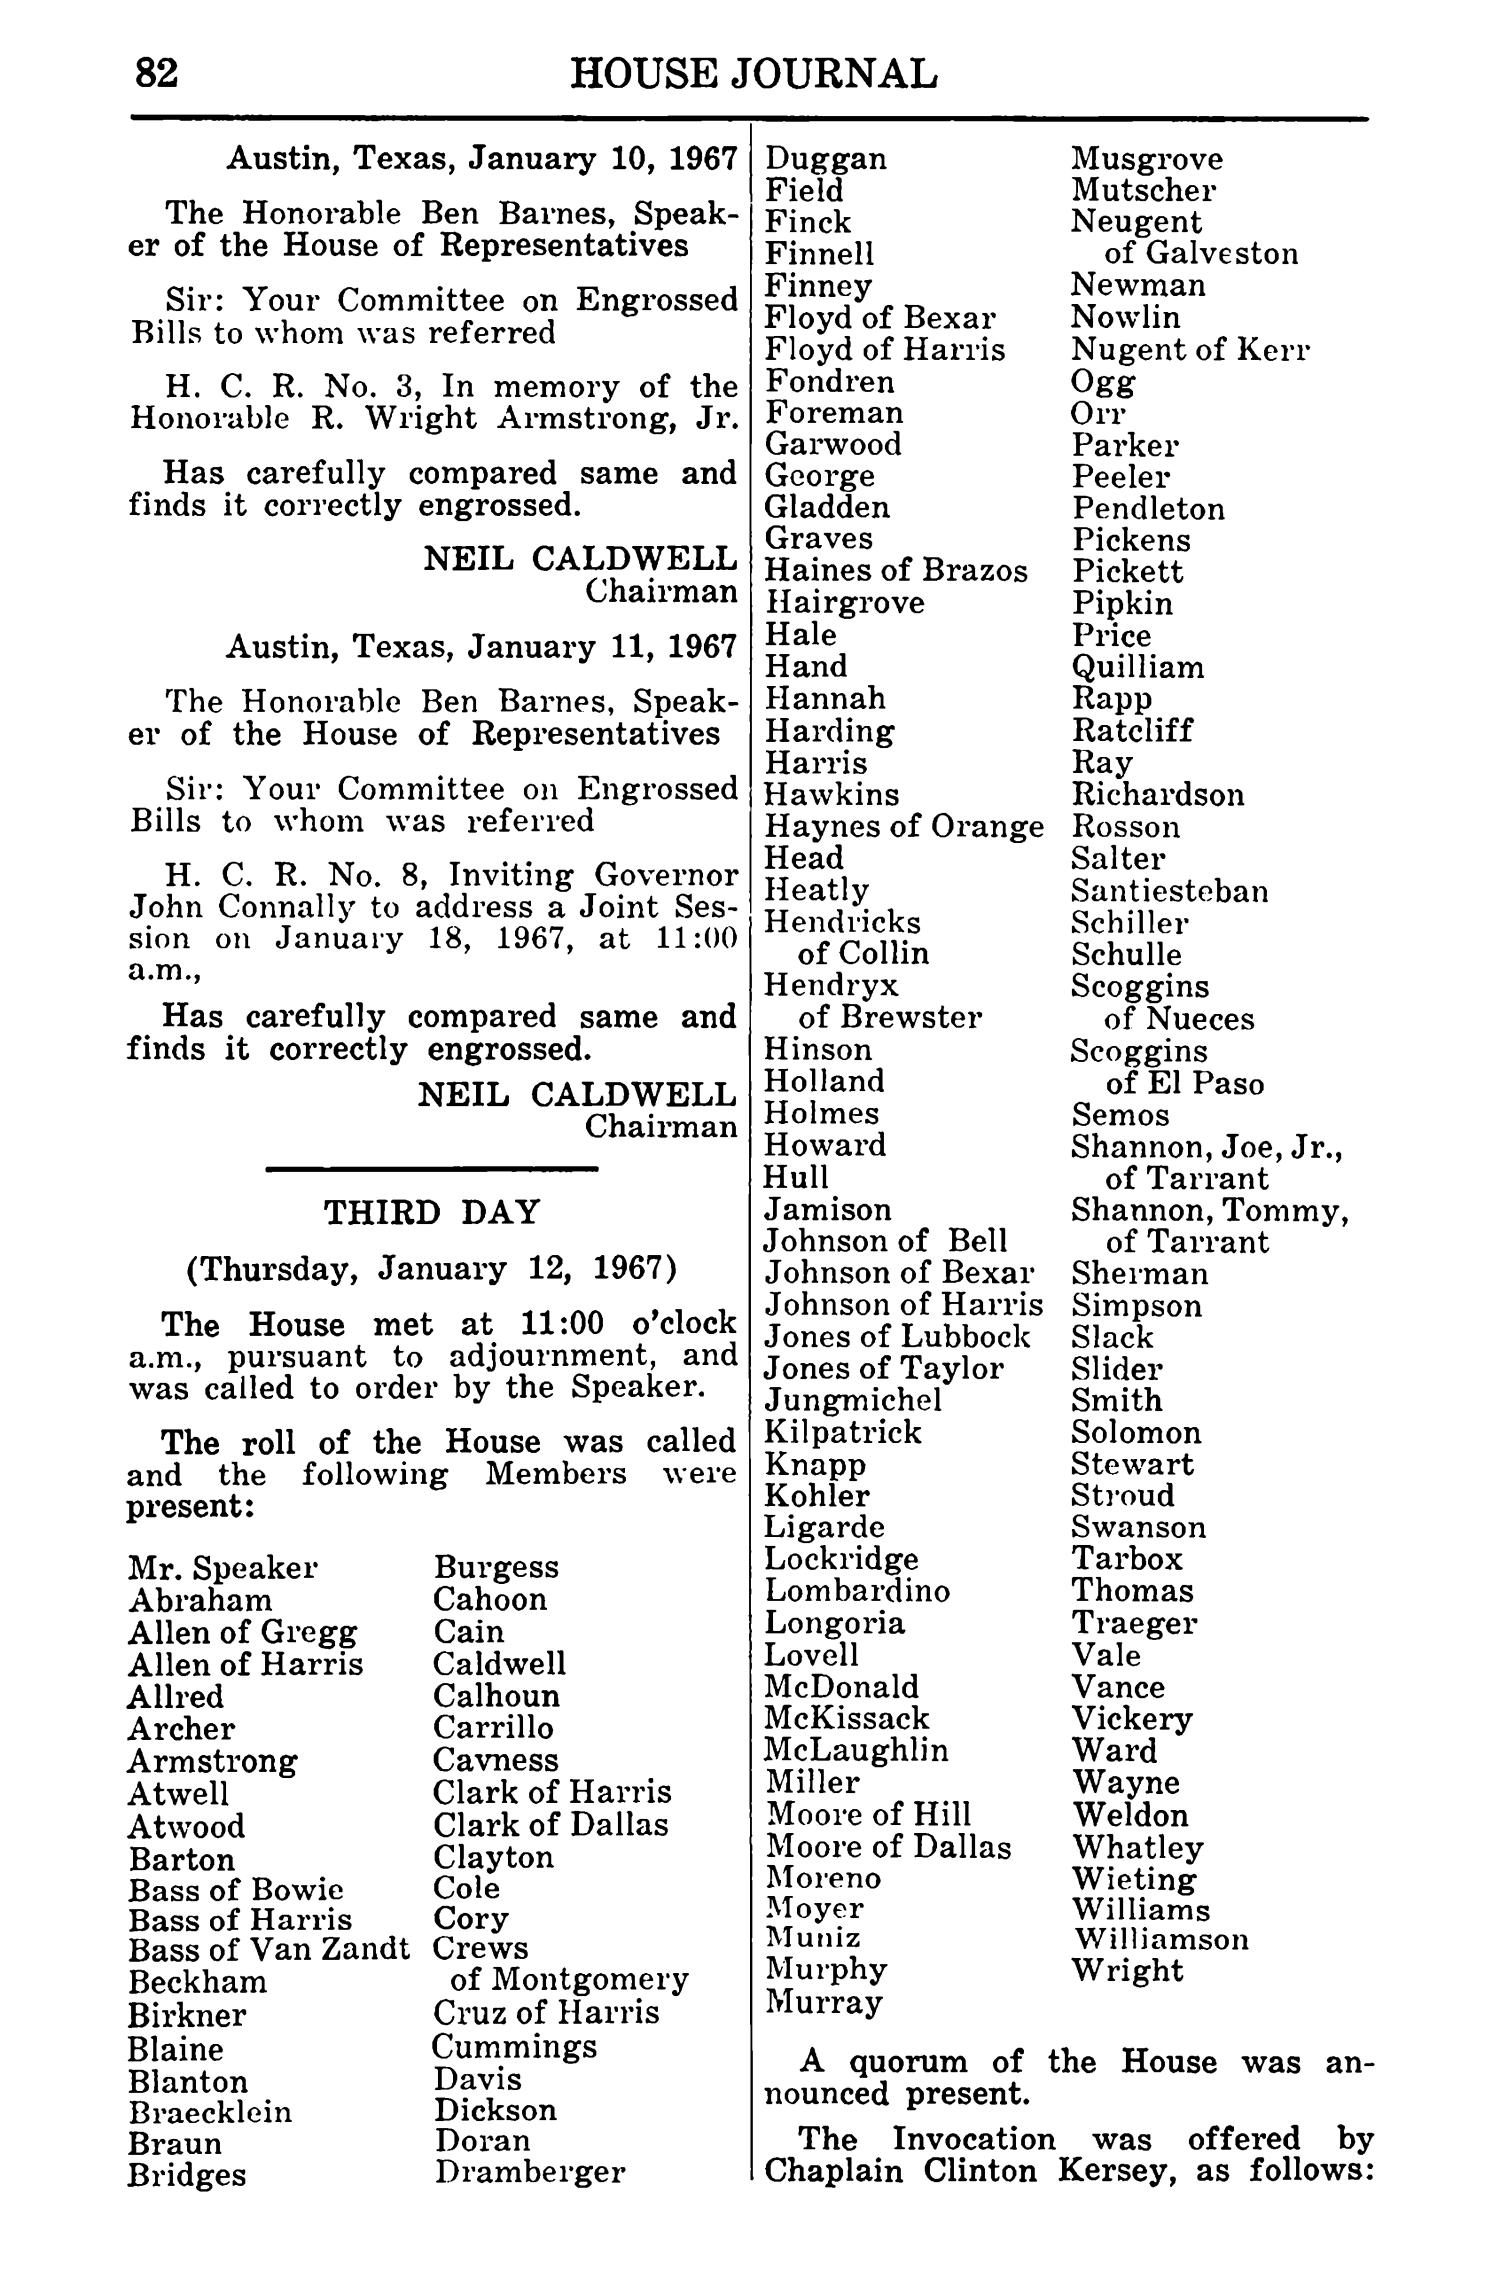 Journal of the House of Representatives of the Regular Session of the Sixtieth Legislature of the State of Texas, Volume 1
                                                
                                                    82
                                                